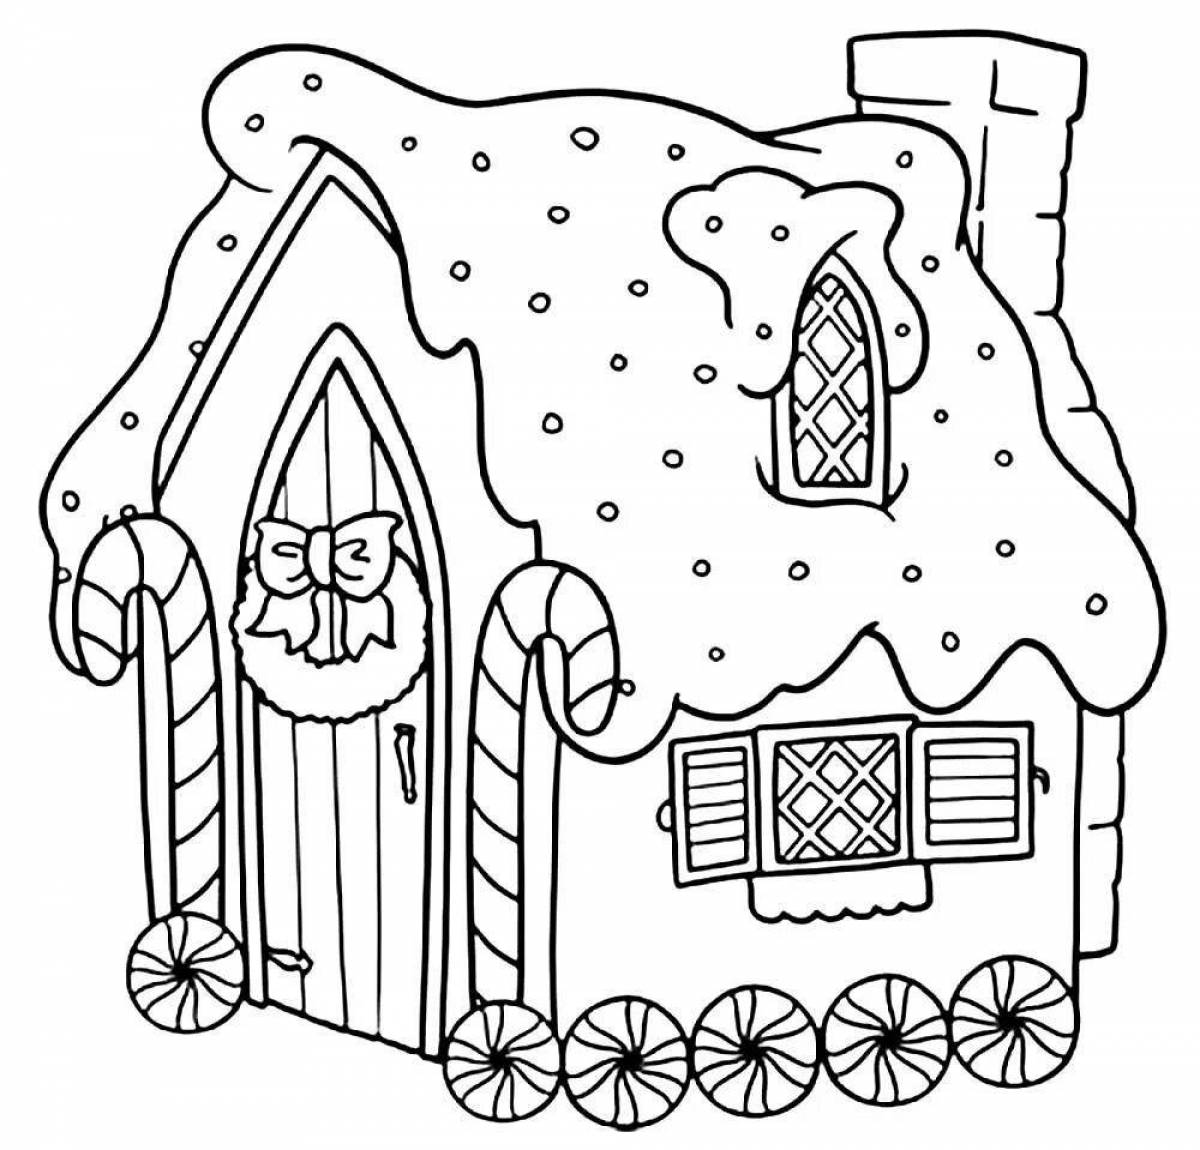 Coloring pages winter house for children